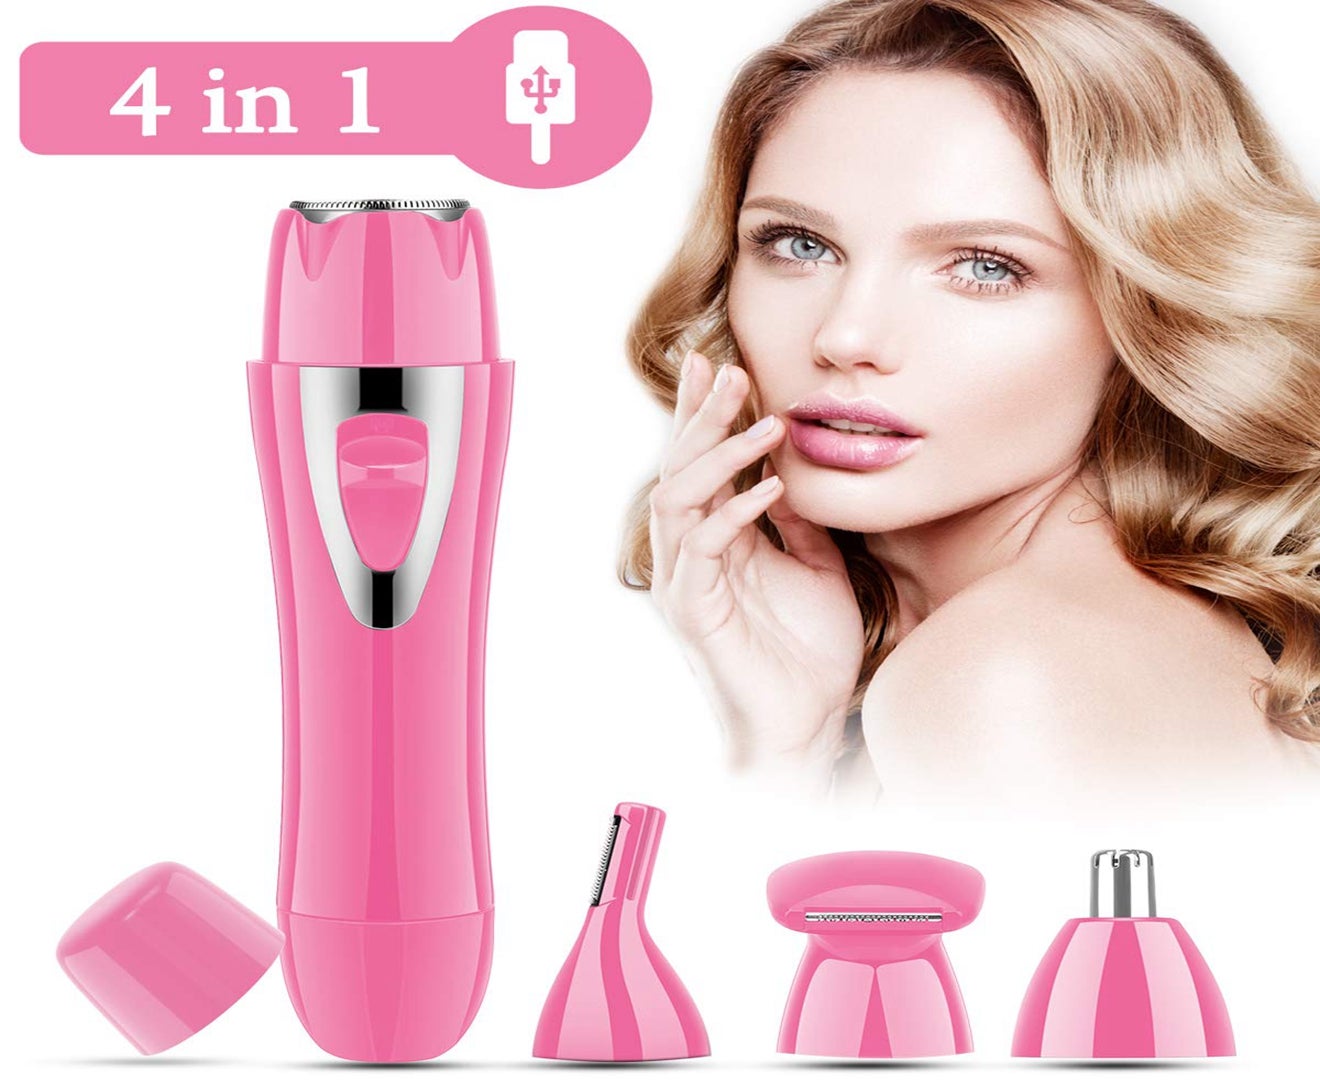 Facial Hair Removal for Women - 4 in 1 Nose Hair Trimmer, Eyebrow Trimmer, Body Shaver and Face Hair Remove Waterproof USB Rechargeable Razor